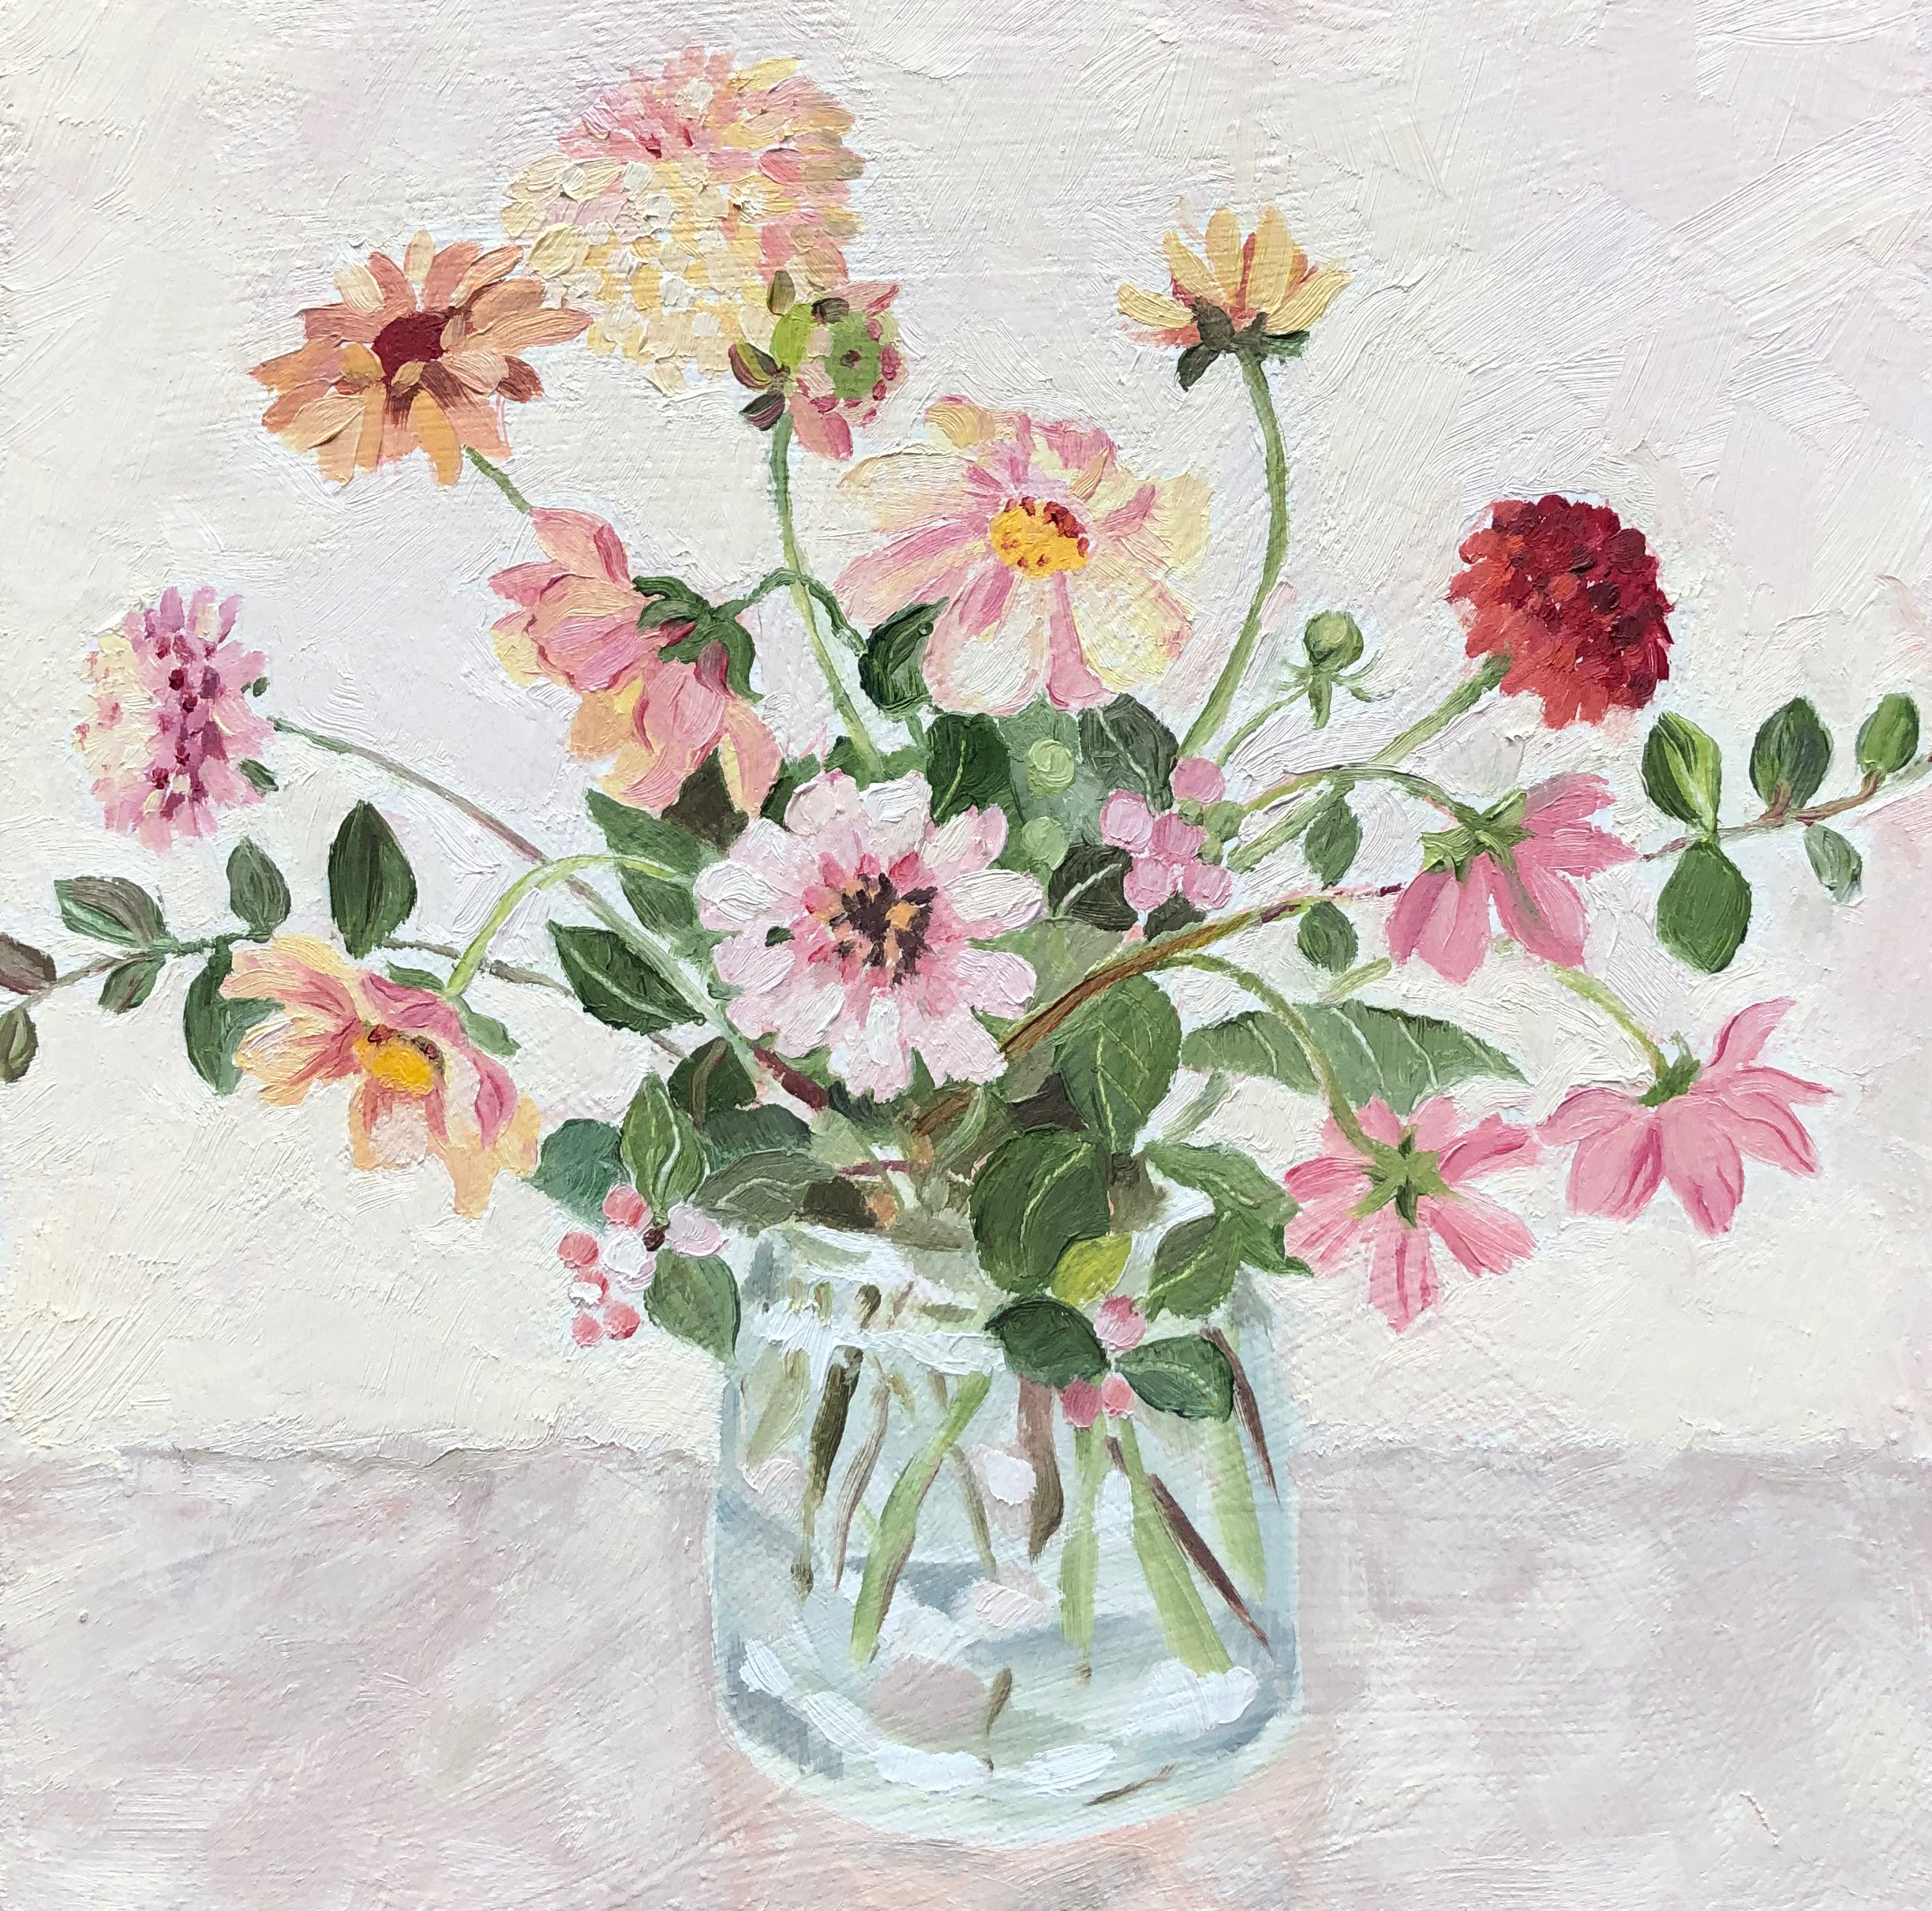 Dahlias and Cosmos, 20 x 20cm, oil on board.  Sold